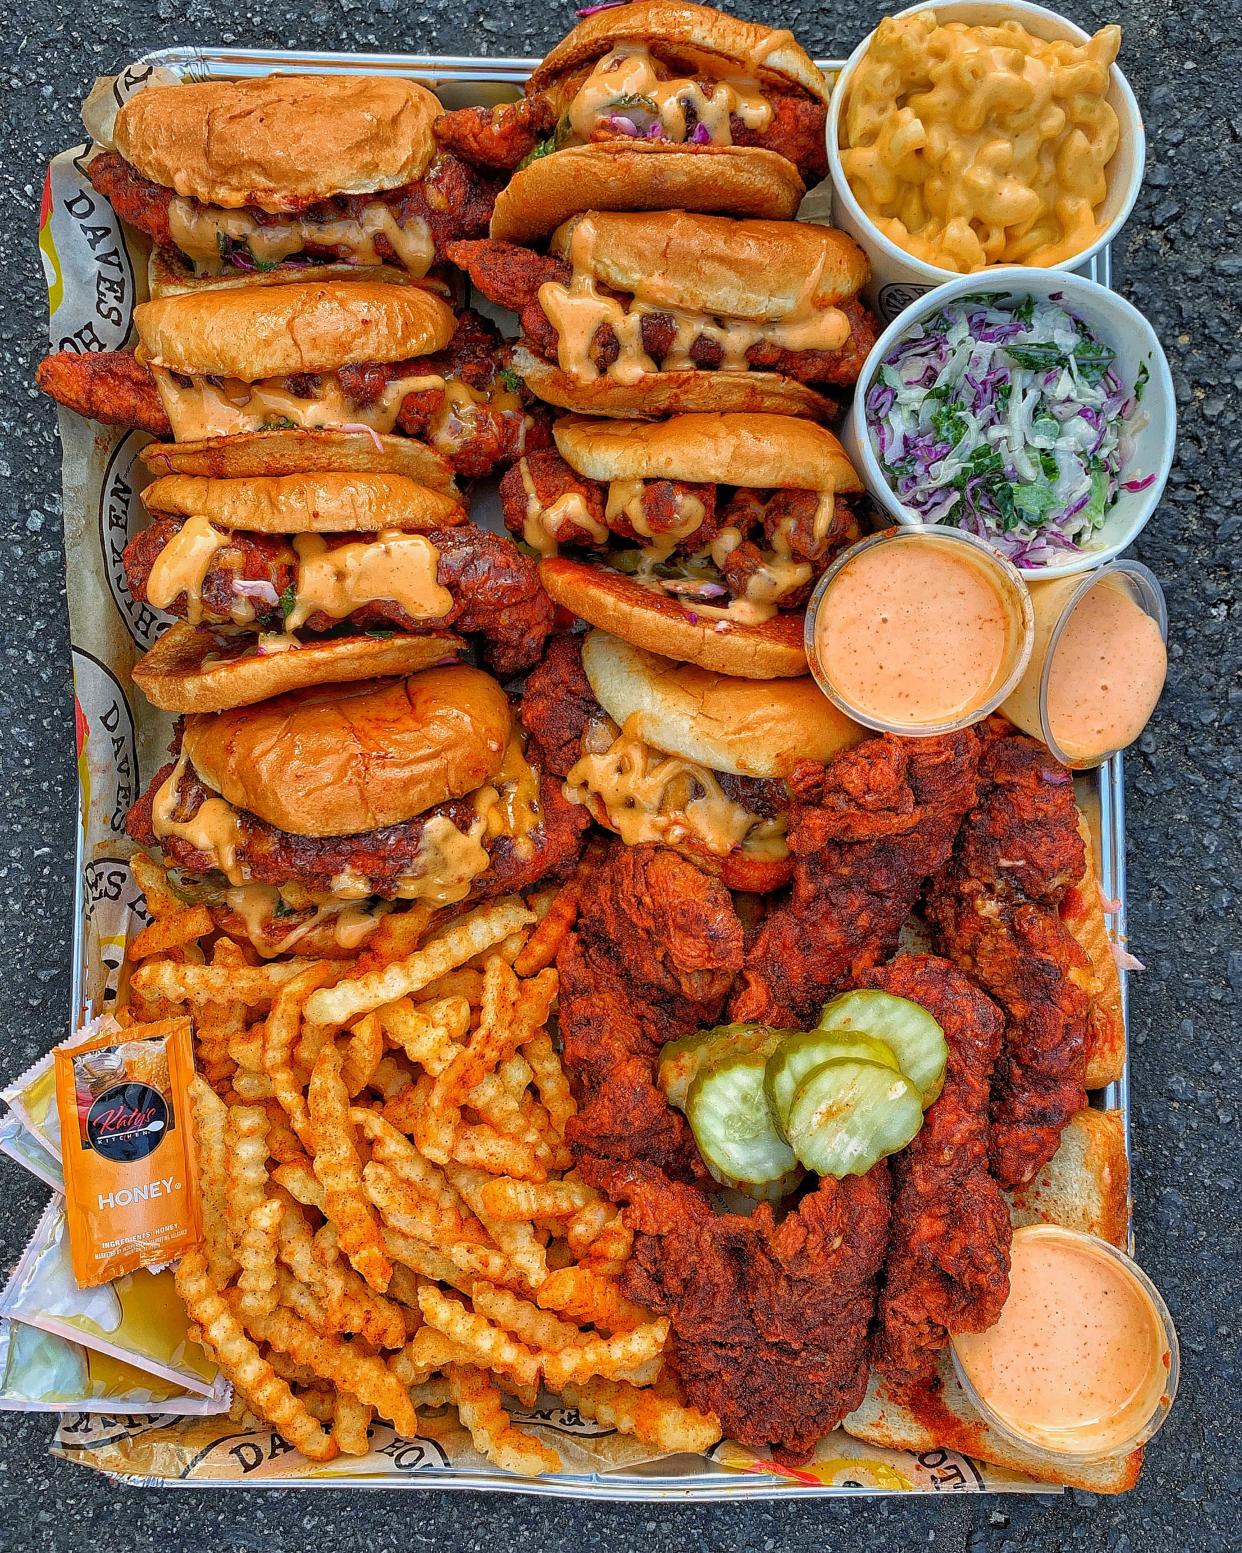 A platter of Dave's Hot Chicken is pictured.